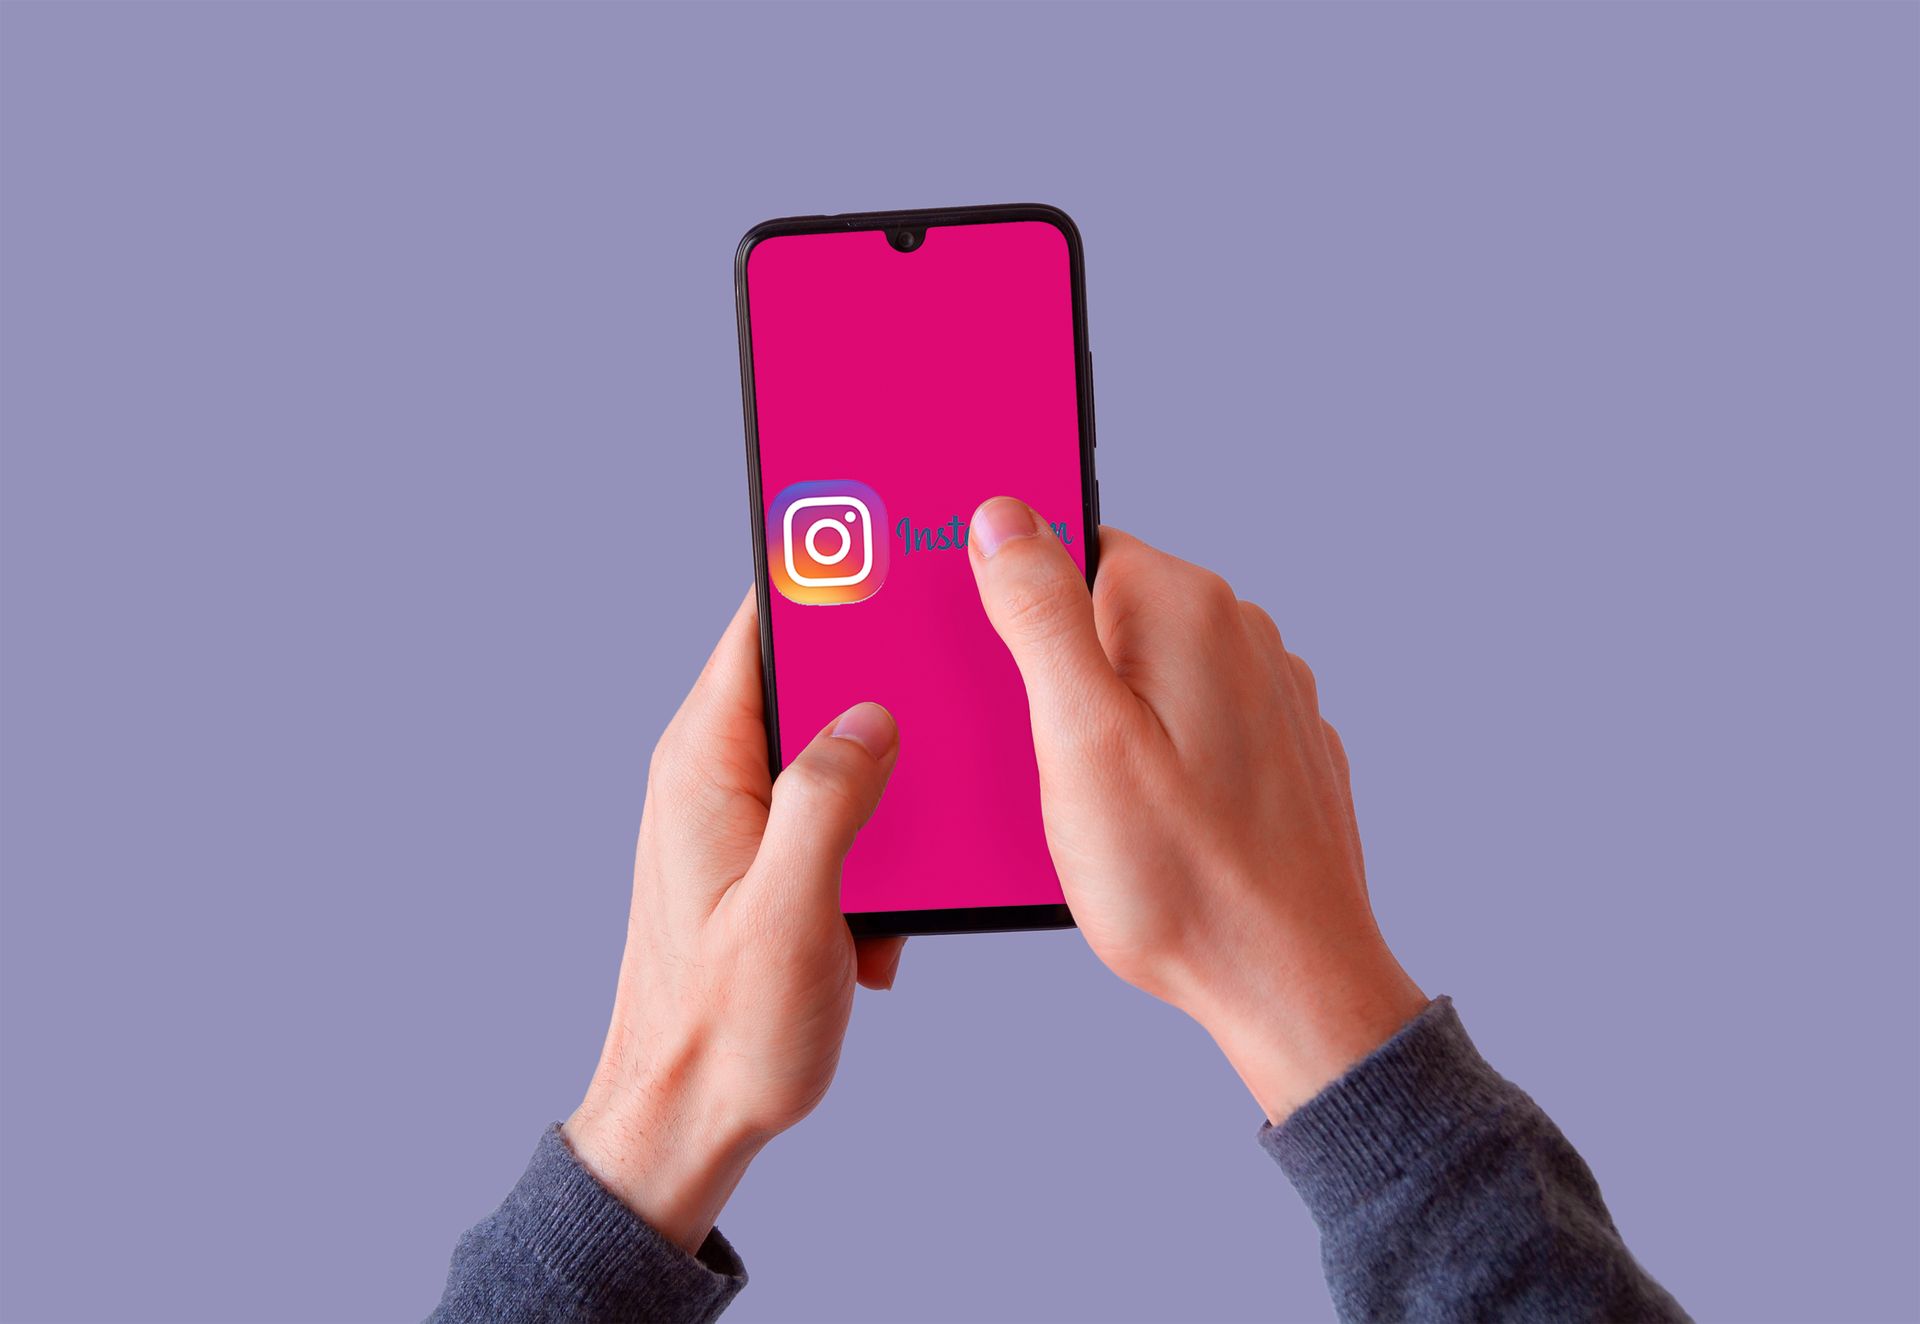 Instagram skipping stories glitch: How to the fix Instagram stories too fast issue?